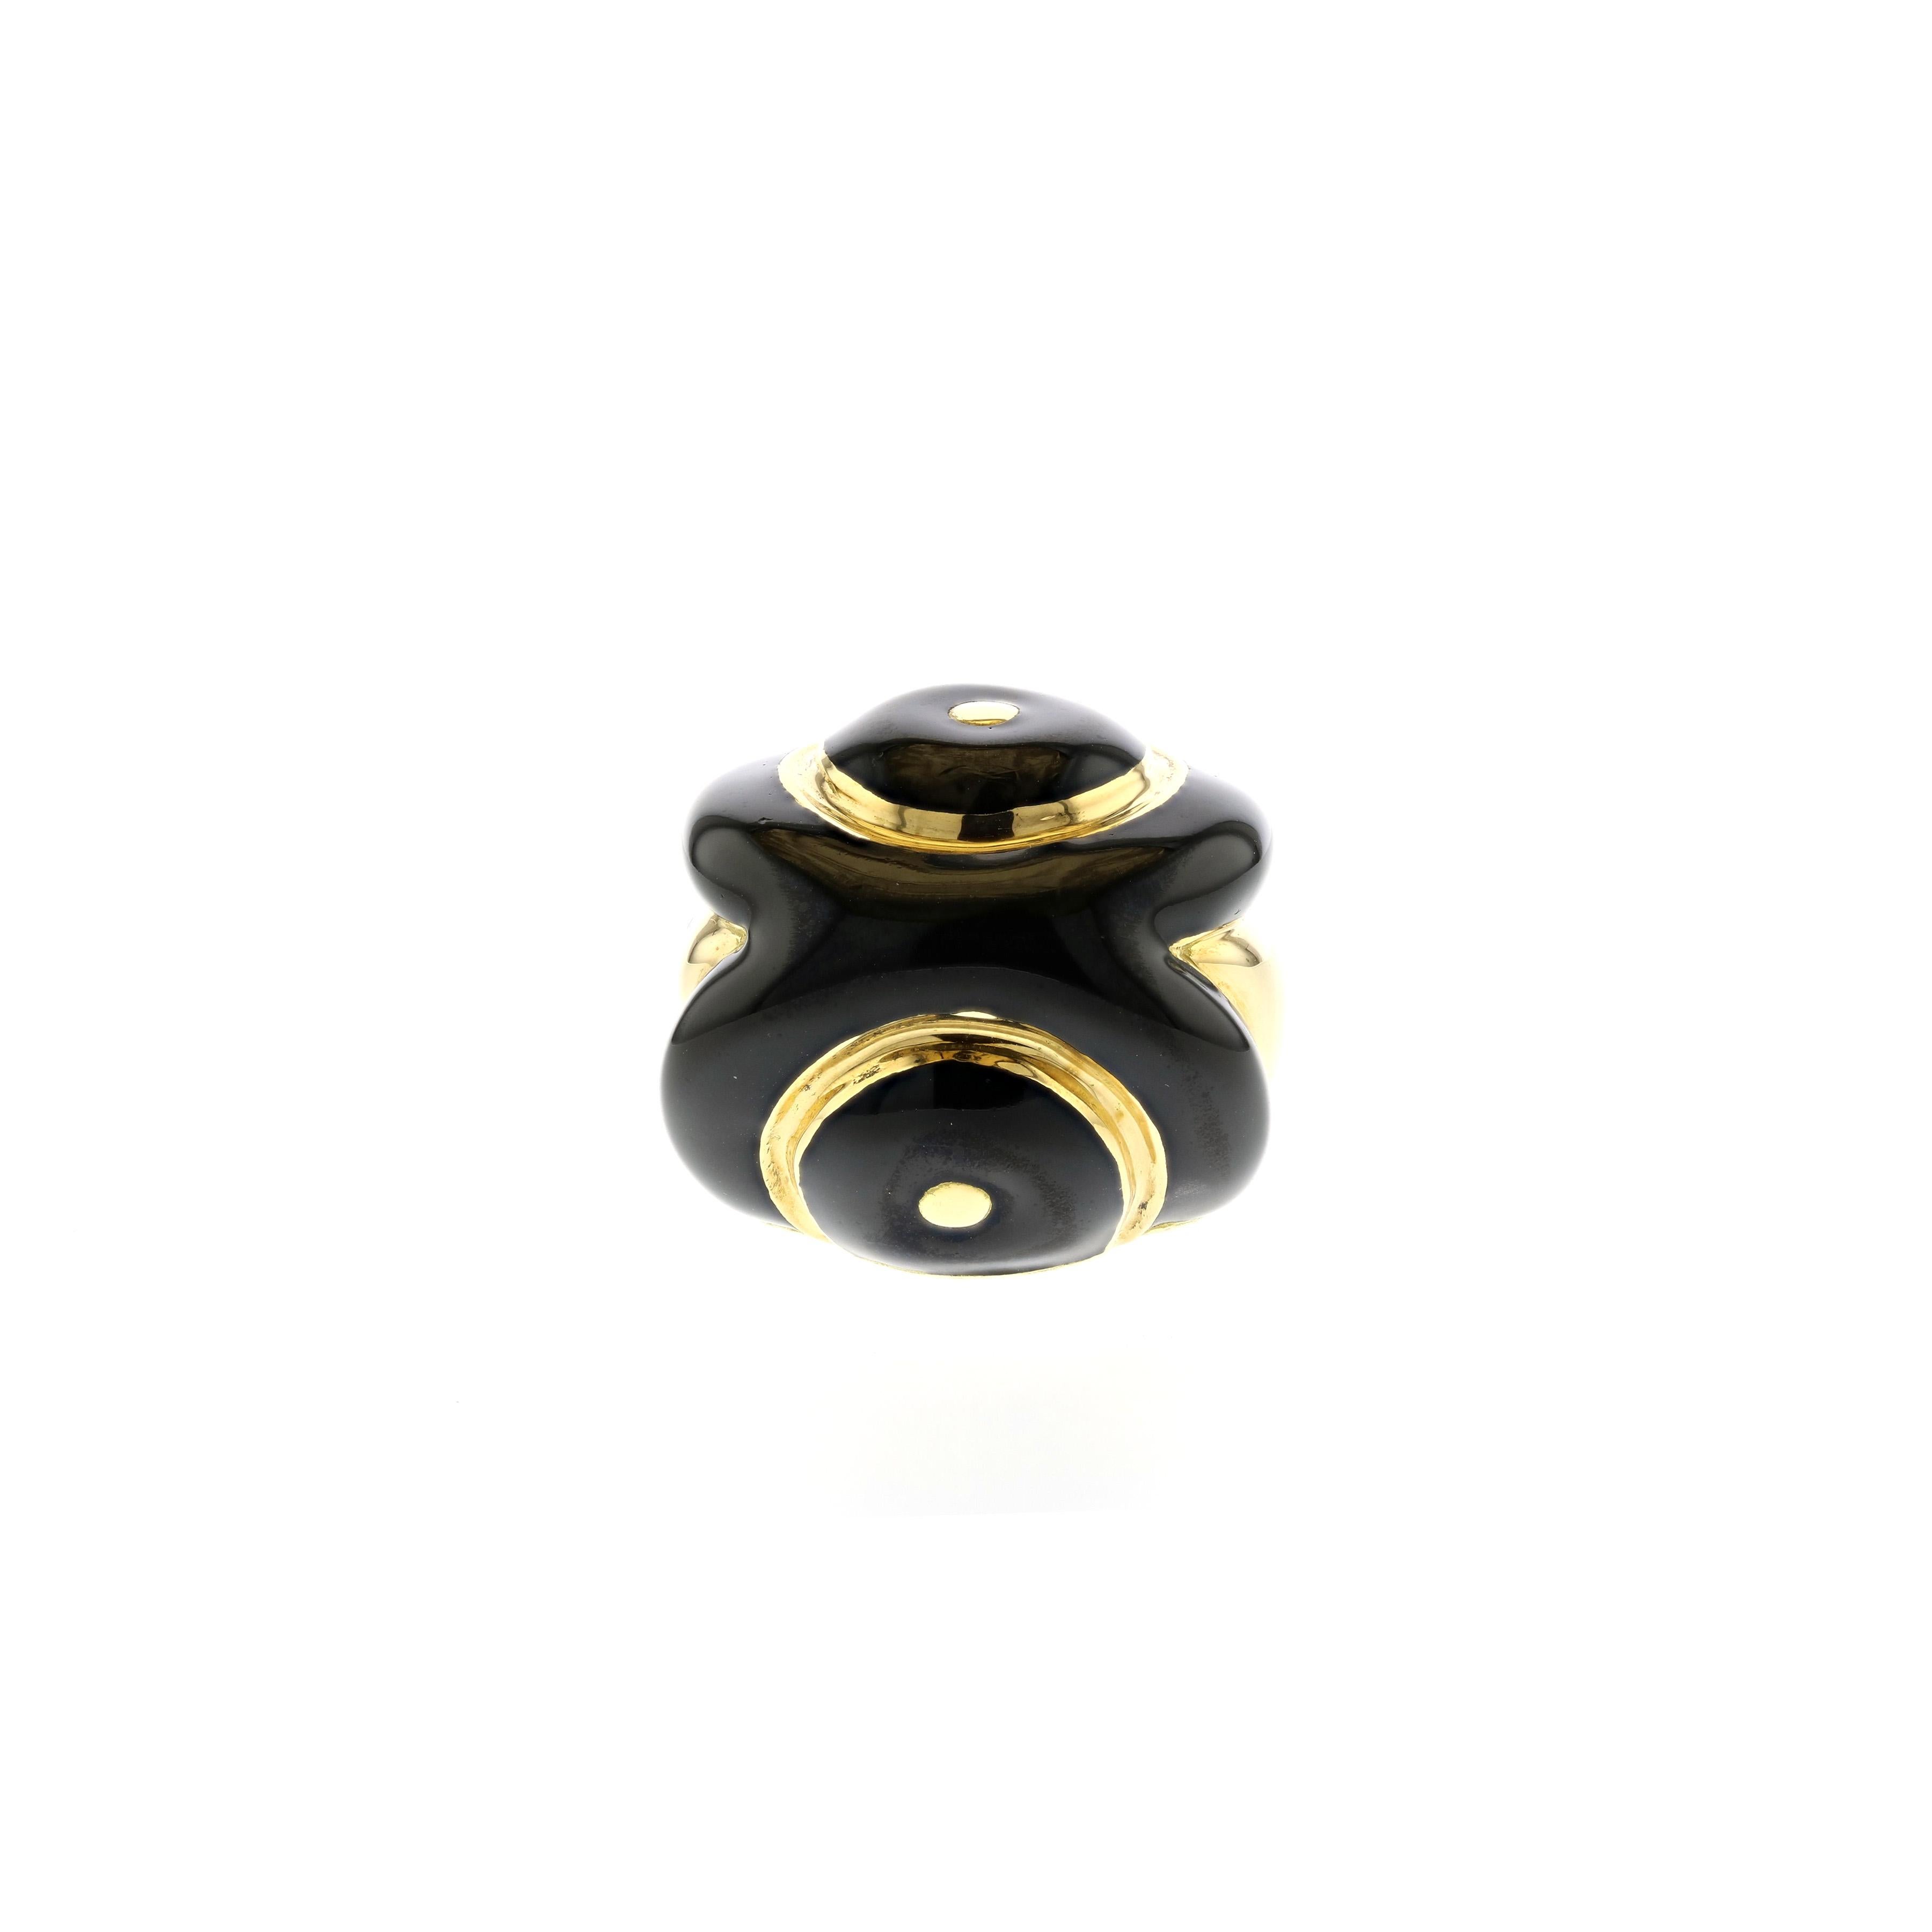 David Webb ring in 18K yellow gold with black enamel.  The ring is a size 6 1/2 and it does have a butterfly insert.  Measures 15/16 inches by 15/16 inches and stands 5/8 inches off the finger.  Stamped with serial number BS489.  